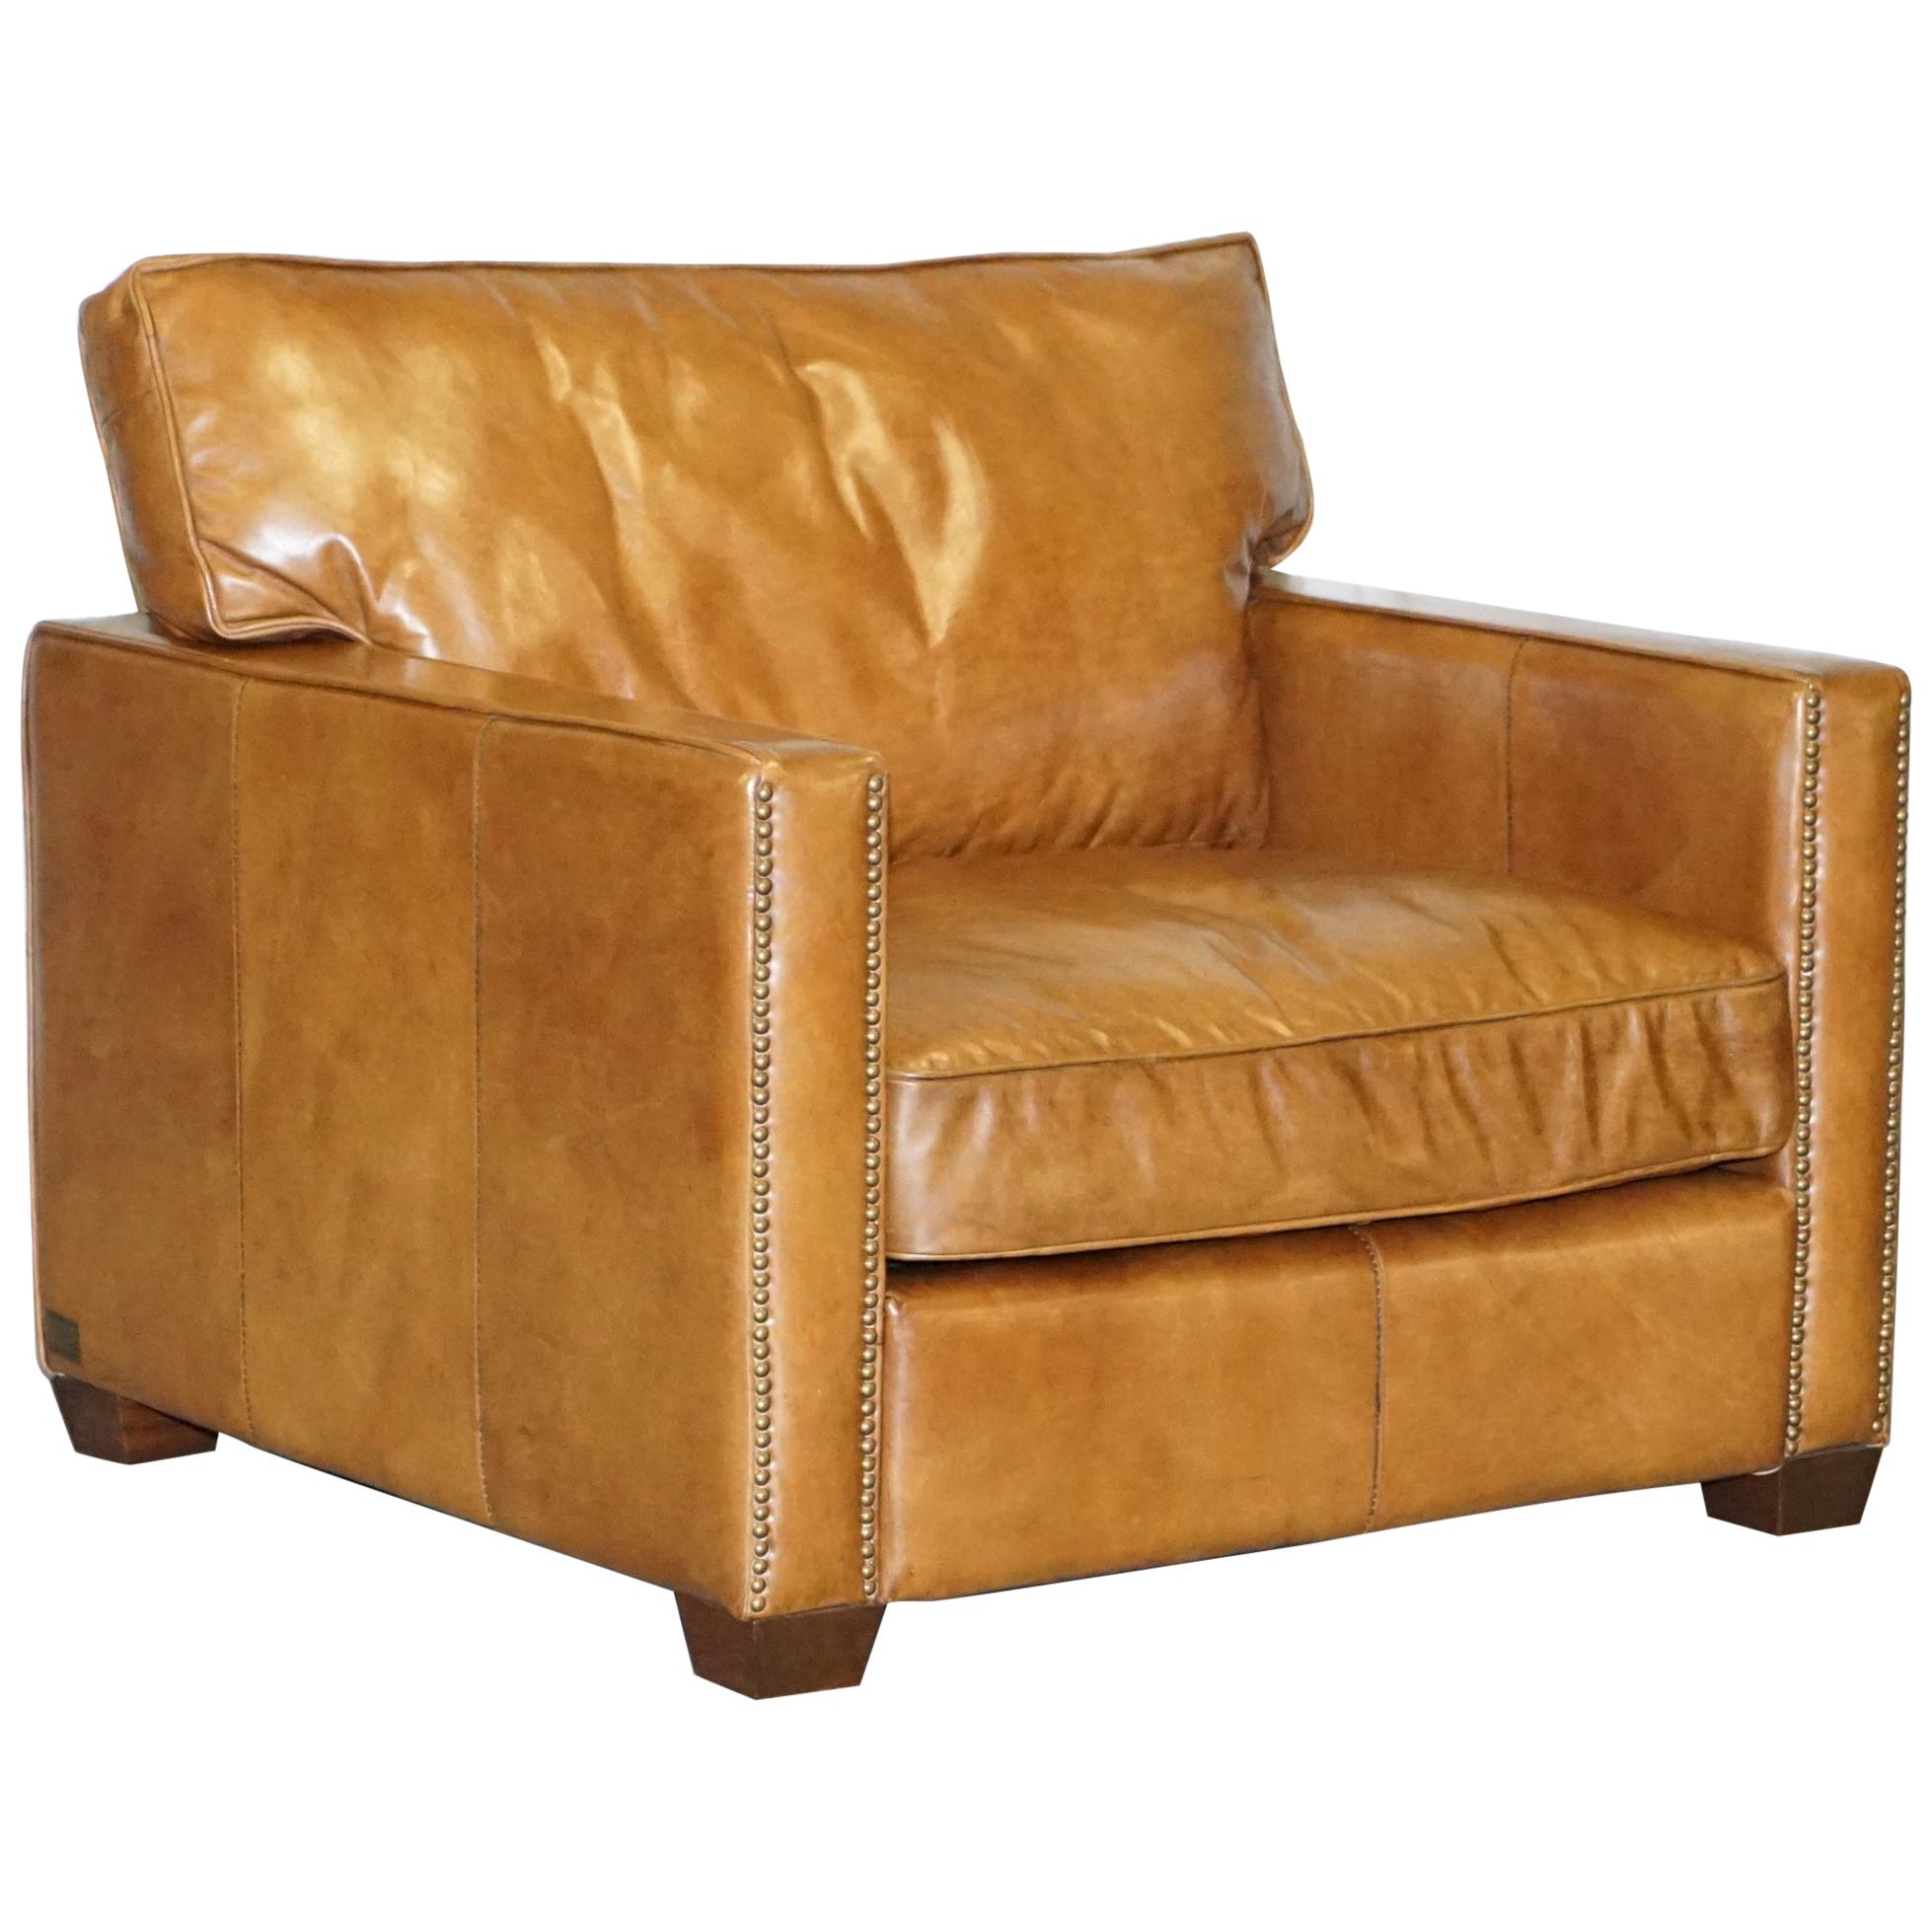 Halo Viscount William Tan Brown Heritage Leather Armchair